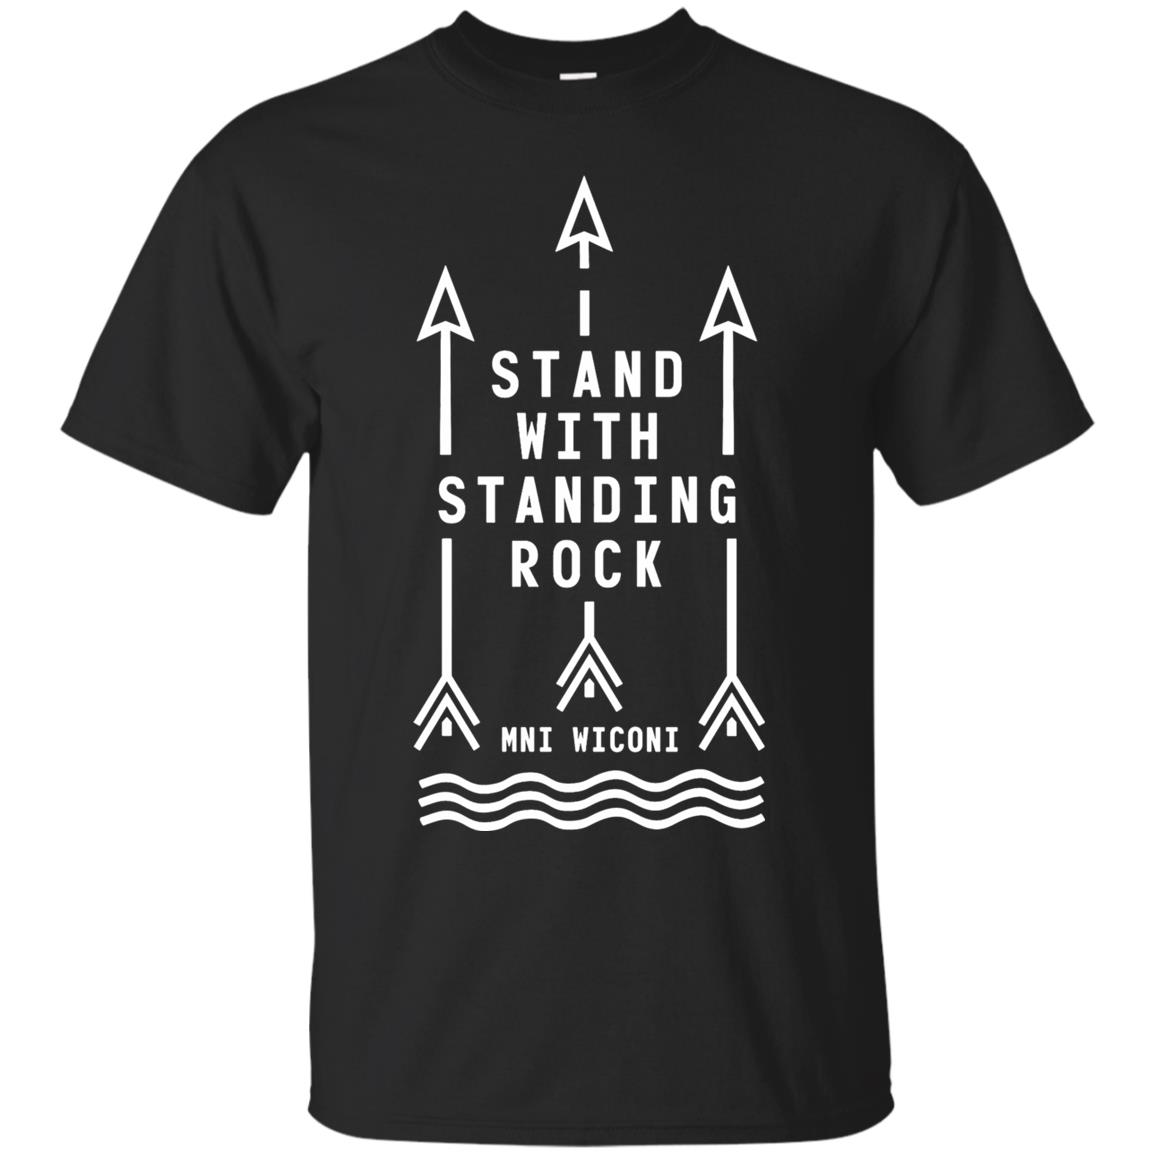 stand with standing rock shirt - black